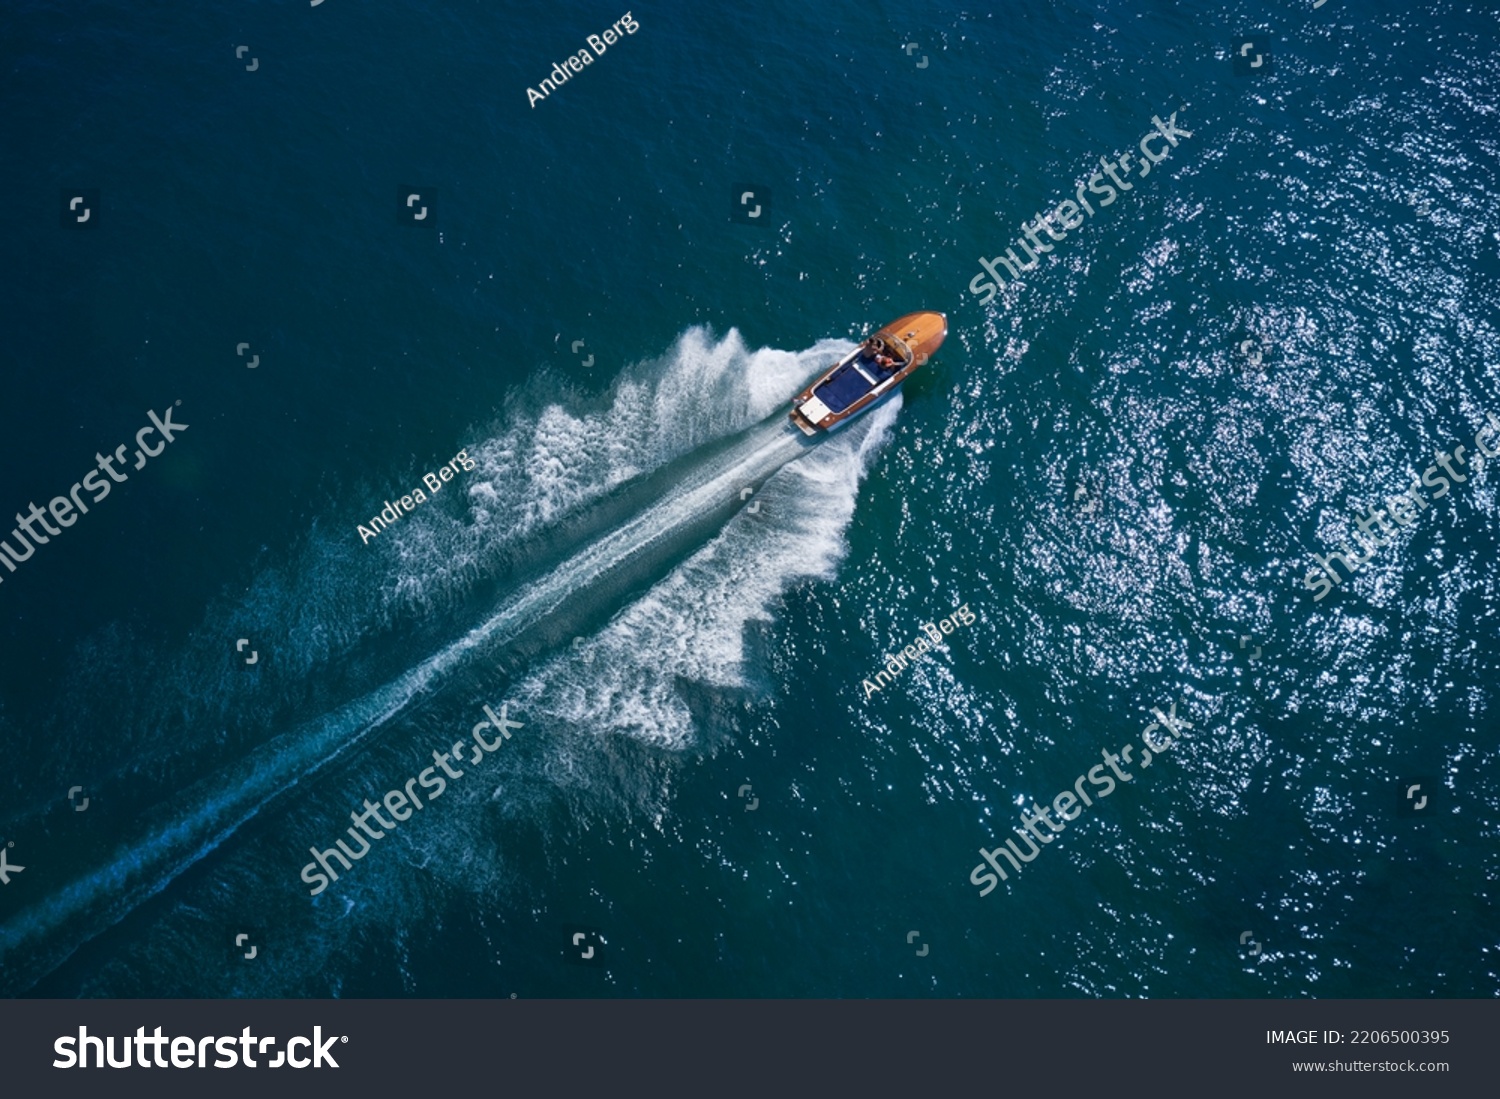 Classic Italian wooden boat fast moving aerial view. Luxurious wooden boat fast movement on dark water. Luxurious wooden motor boat rushes through the waves of the blue Sea. #2206500395